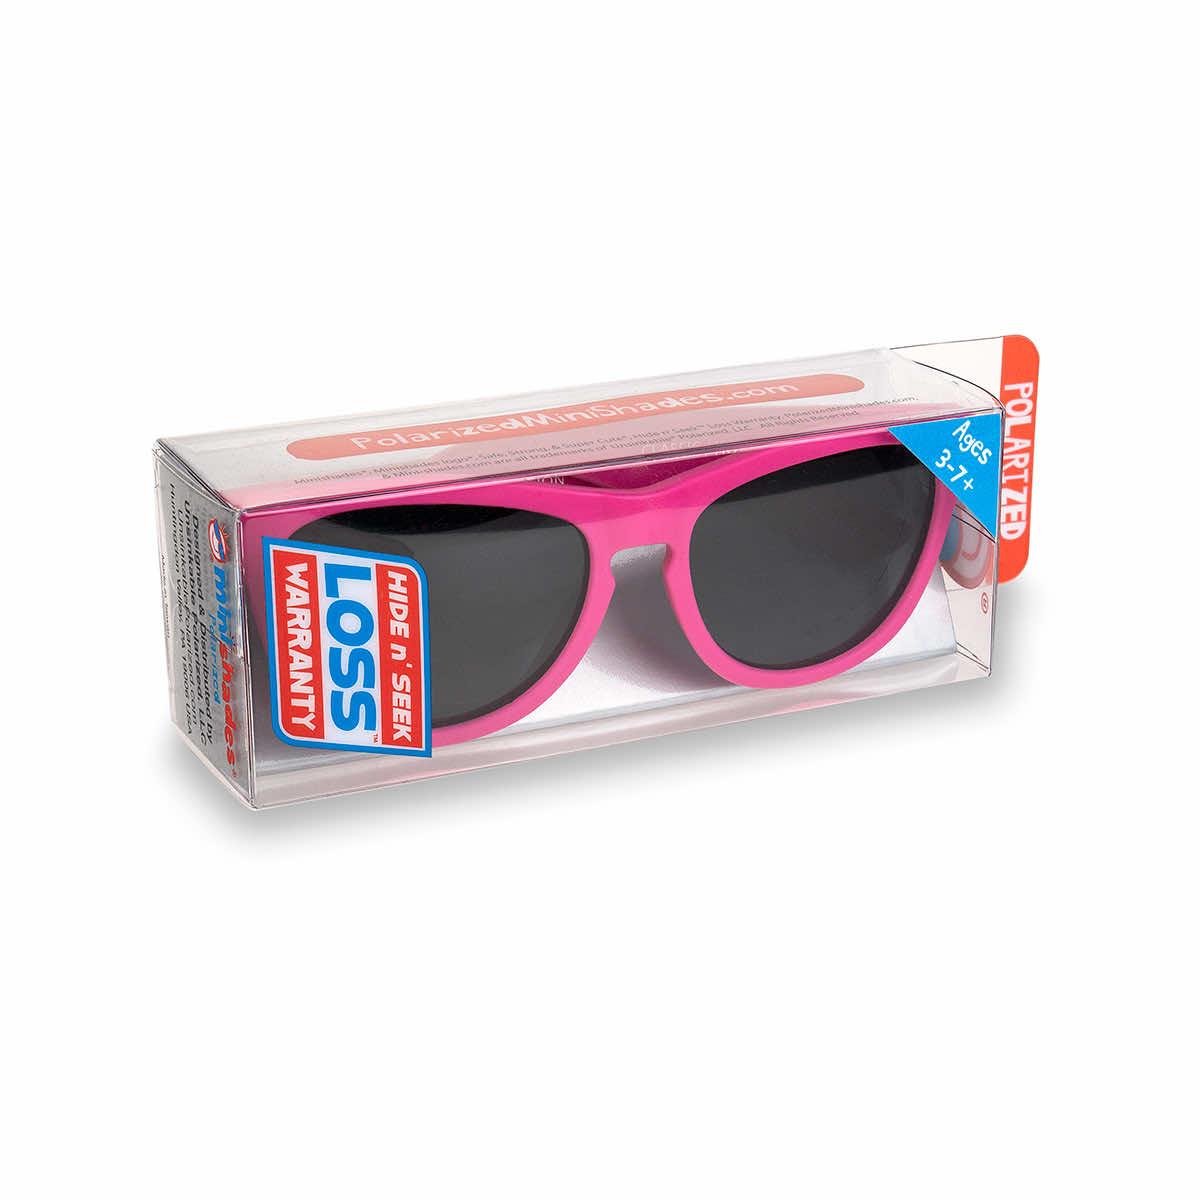 Kids Mini Shades Polarized Hot Pink Sunglasses Ages 37 - Hot_Pink